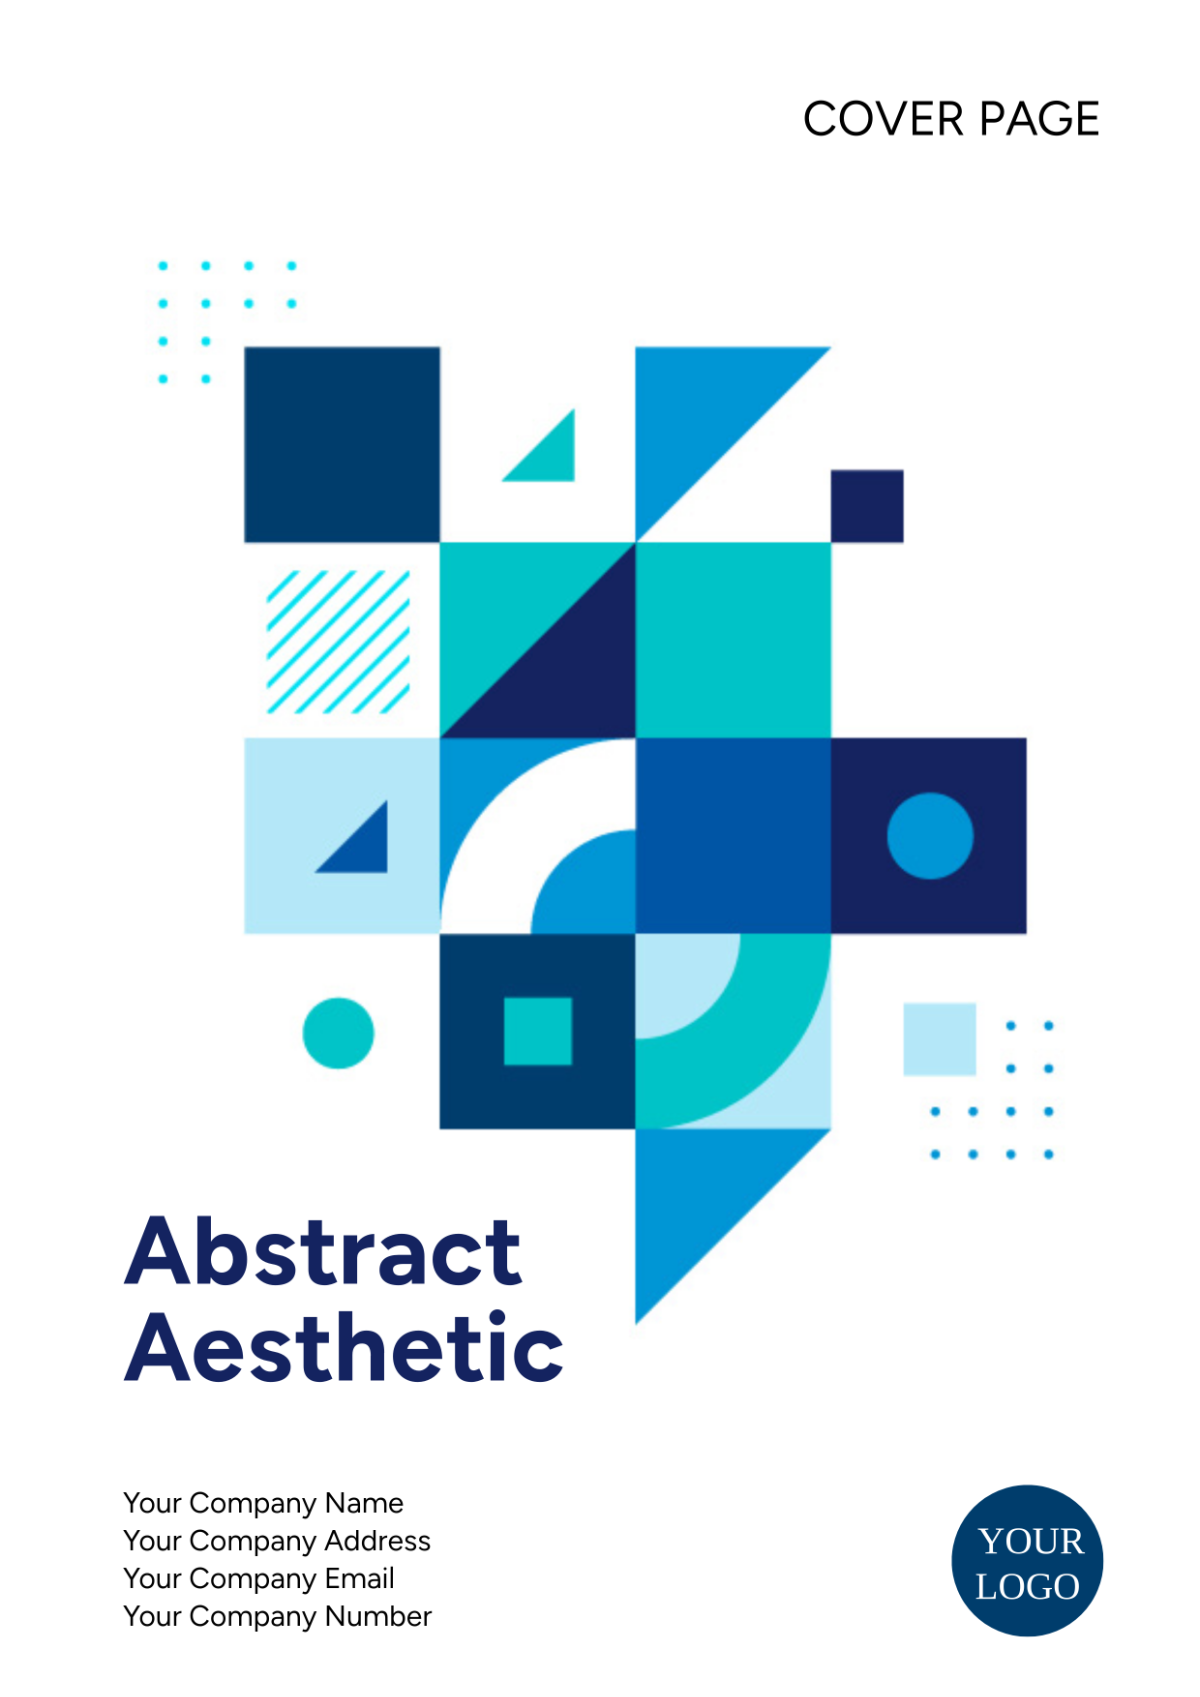 Abstract Aesthetic Cover Page